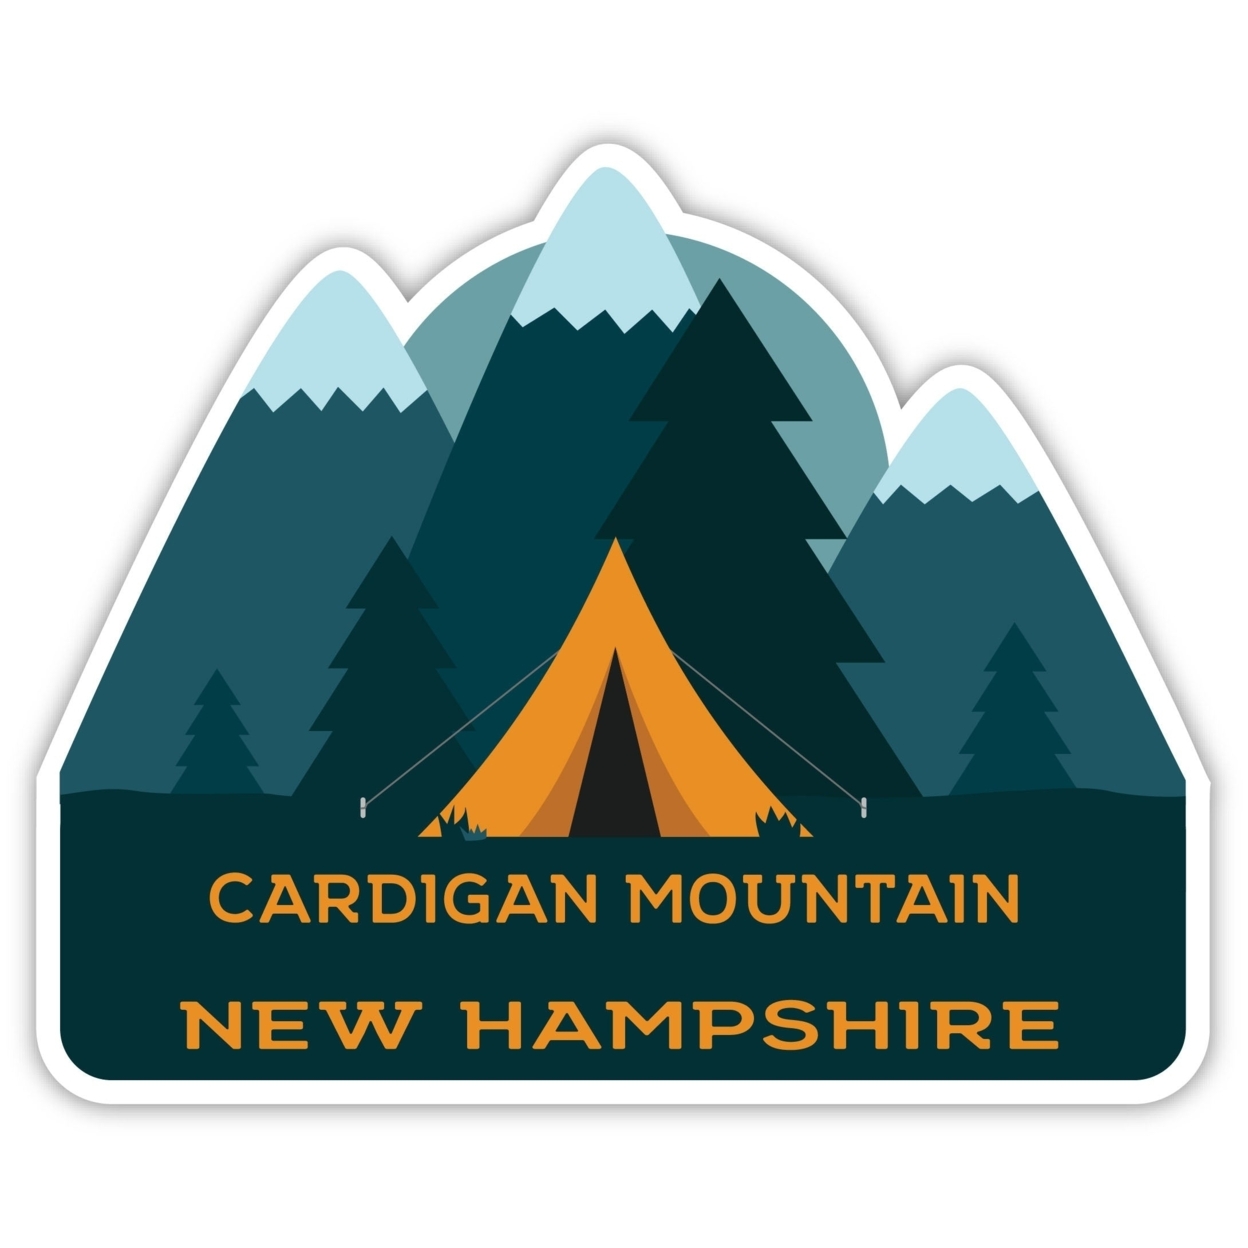 Cardigan Mountain New Hampshire Souvenir Decorative Stickers (Choose Theme And Size) - 4-Pack, 2-Inch, Tent